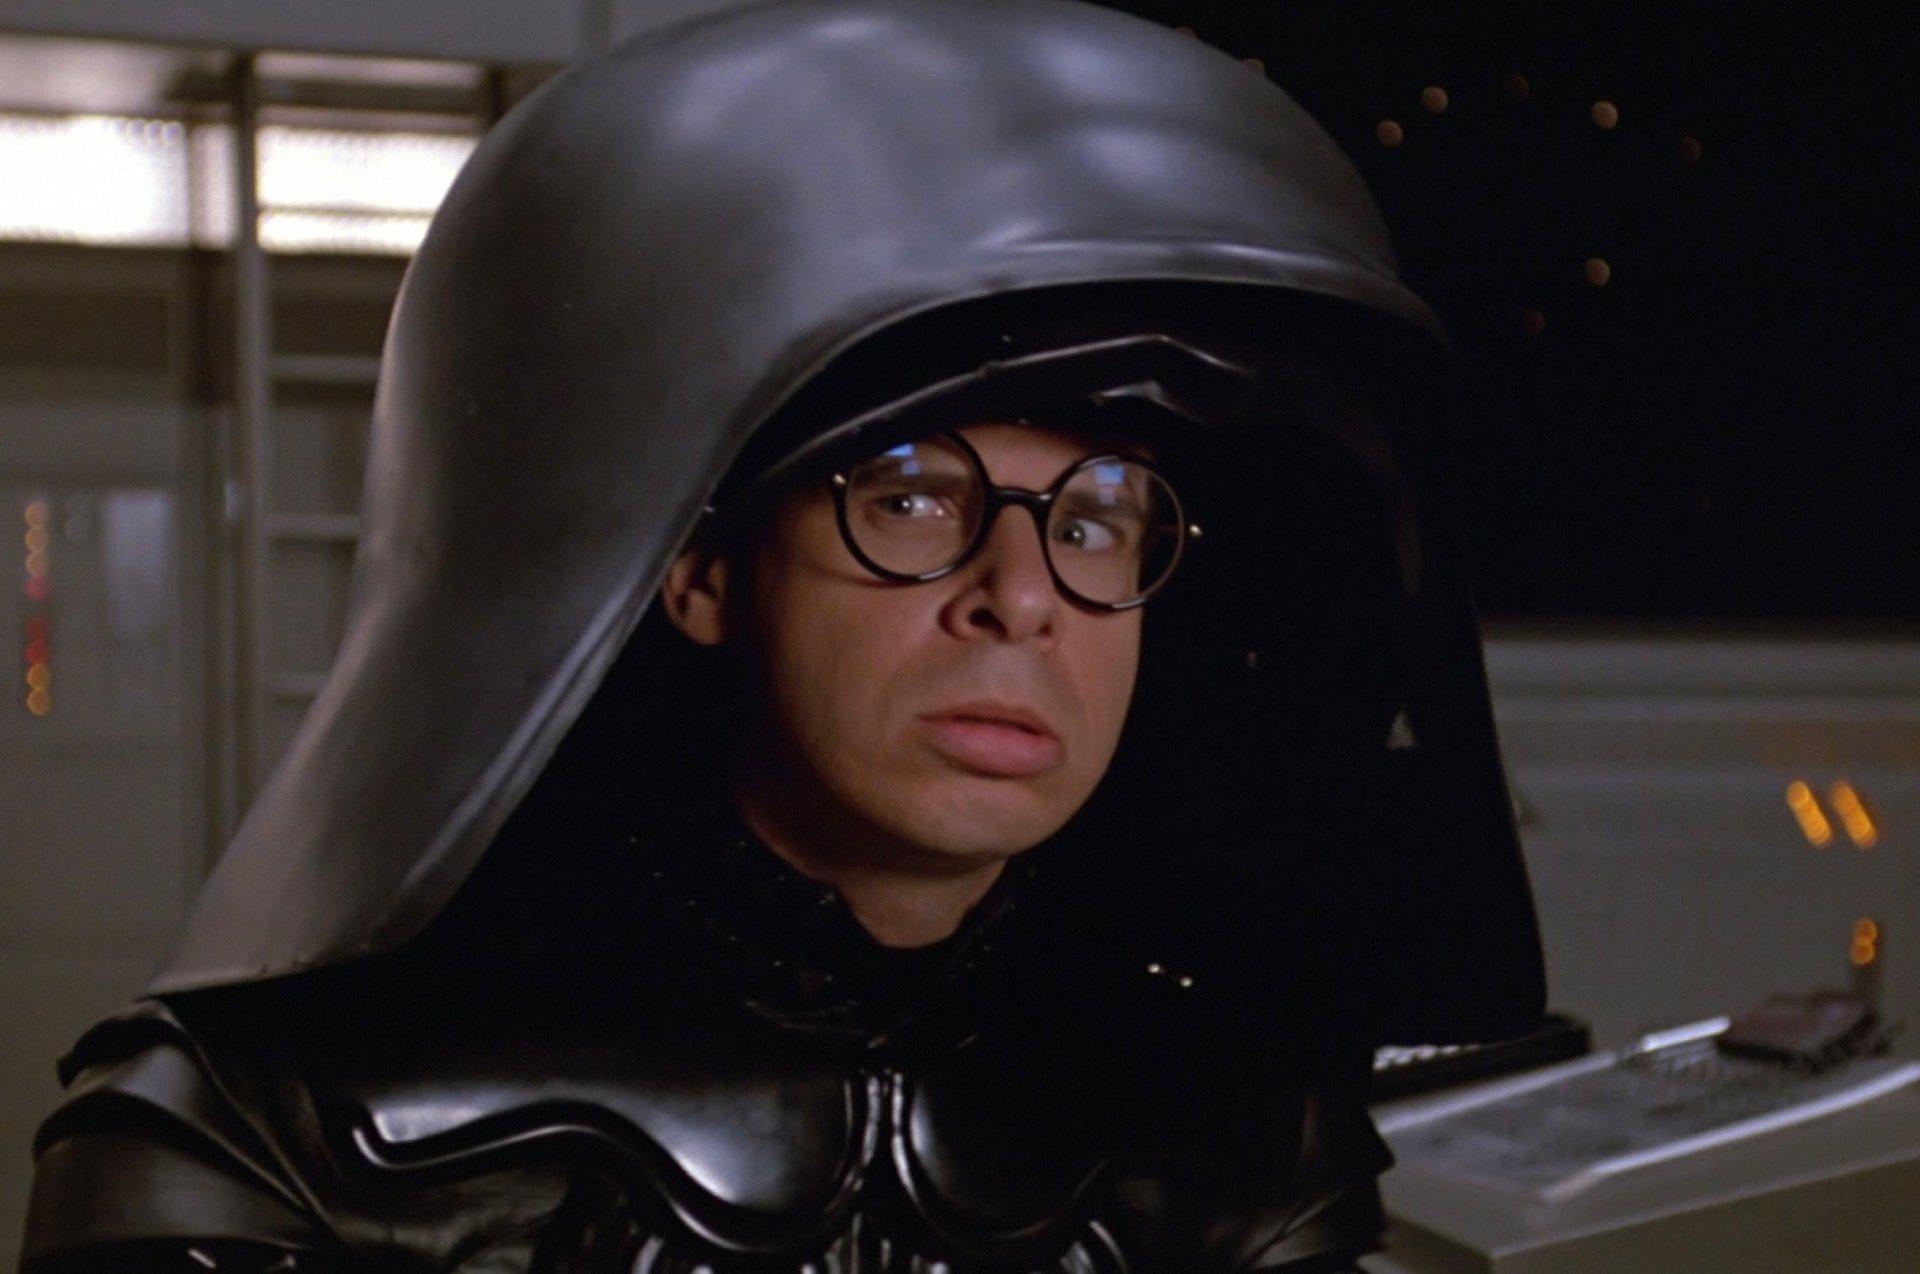 Spaceballs HD Wallpaper and Background Image